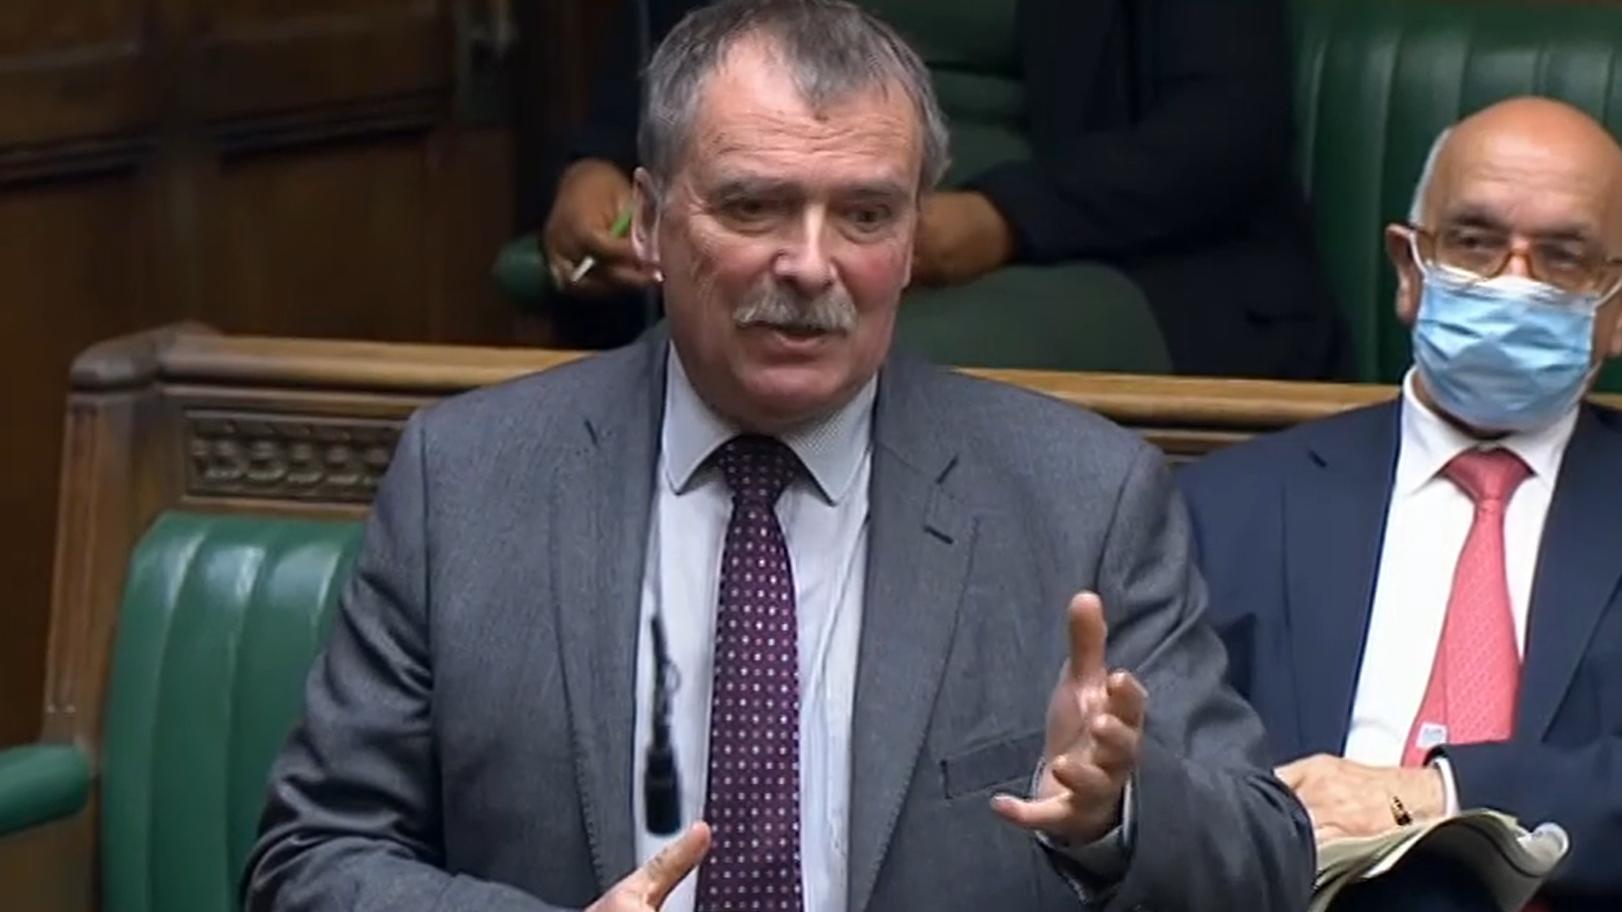 Alan Whitehead MP speaking in the House of Commons